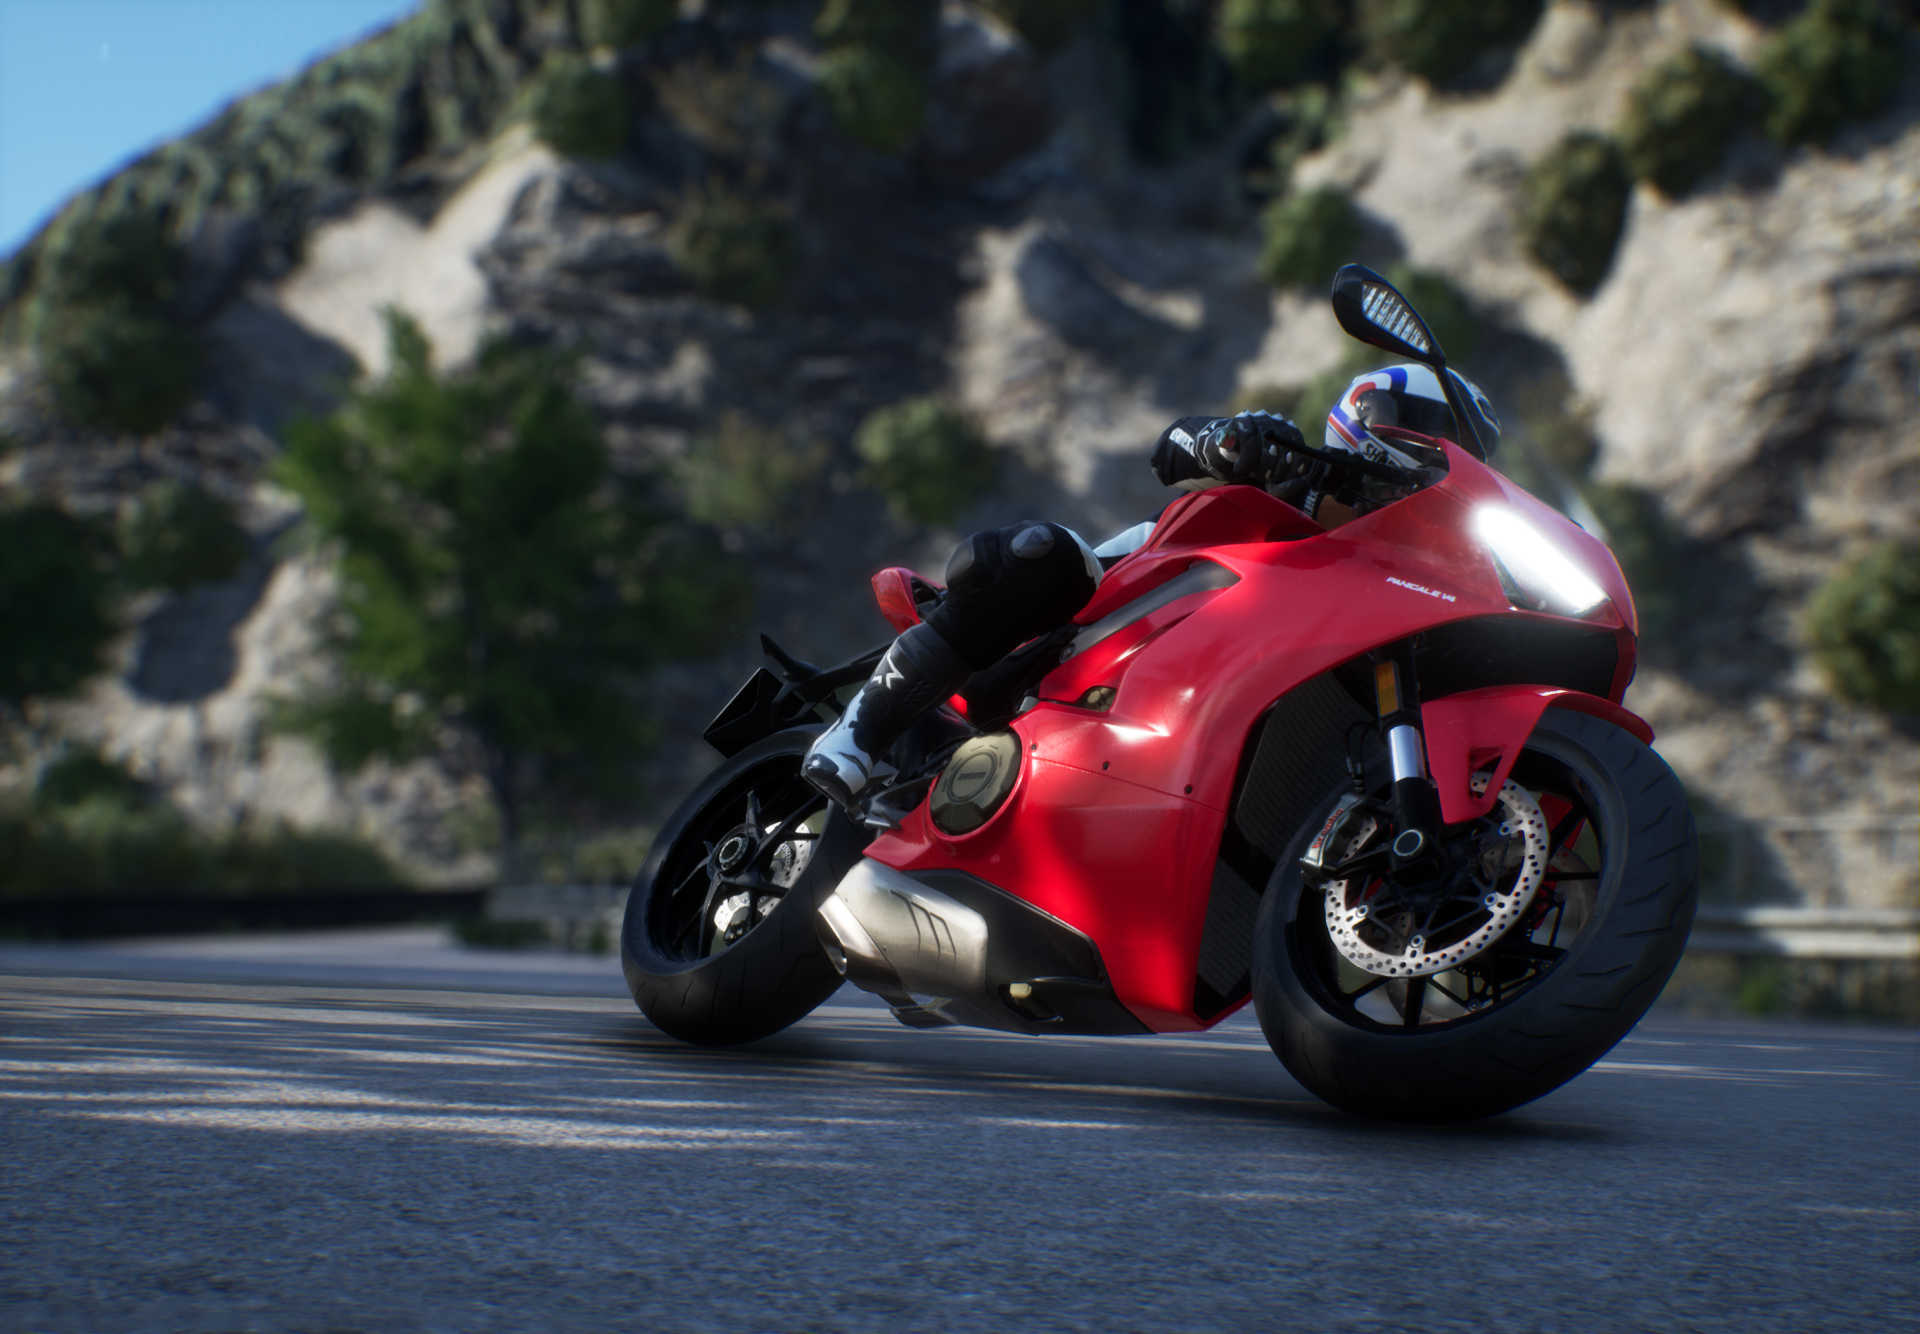 RIDE 3 PS4 Review #36